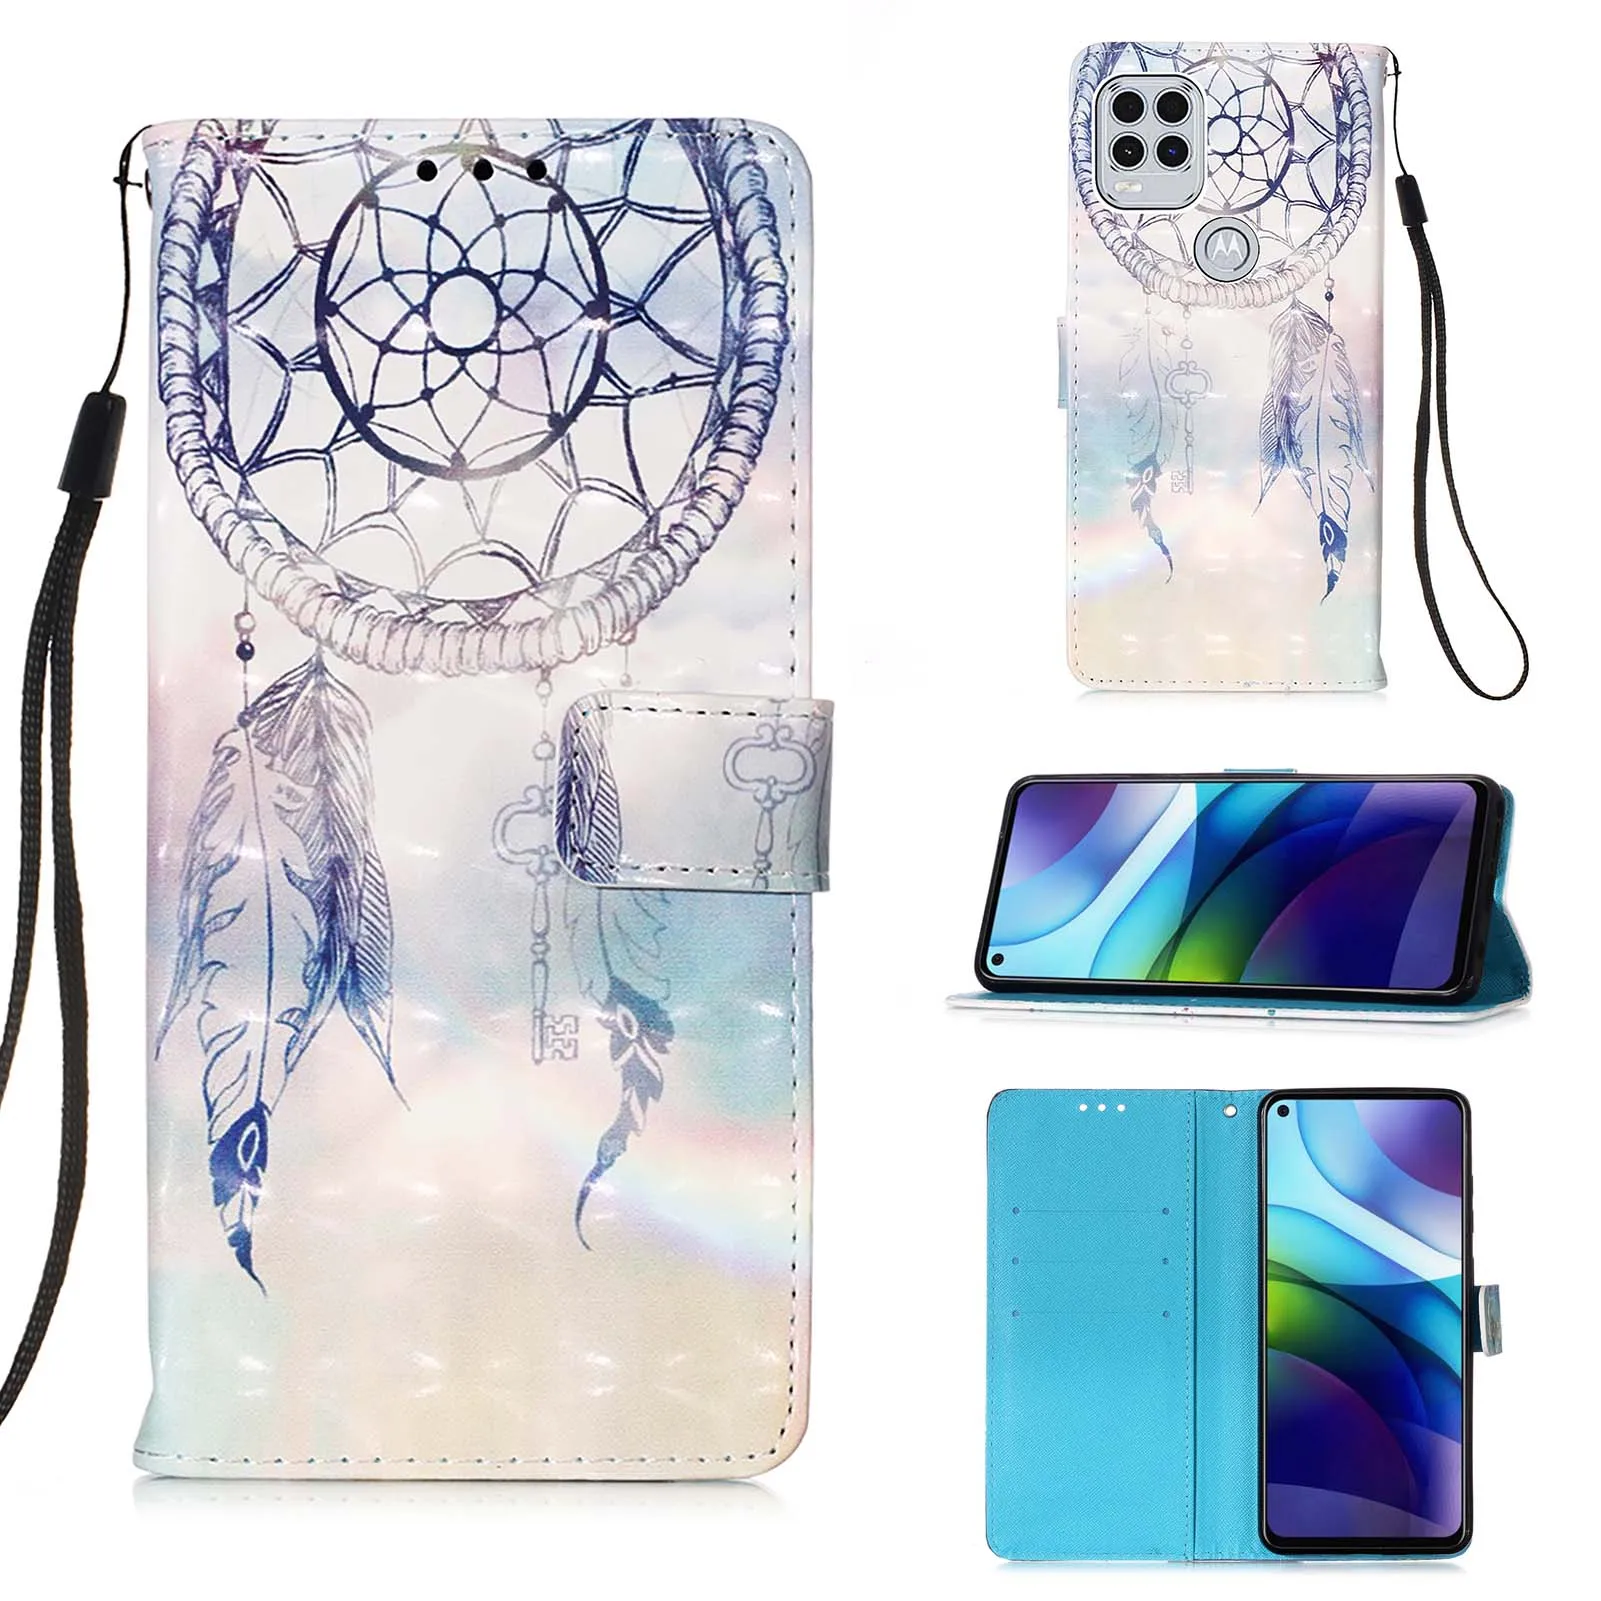 

Painted Leather Flip Phone Case For Huawei Y5 Y6 2017 Y7 Y9 2018 2019 Y5P Y6P Y7P Flower Wallet Card Holder Stand Book Cover